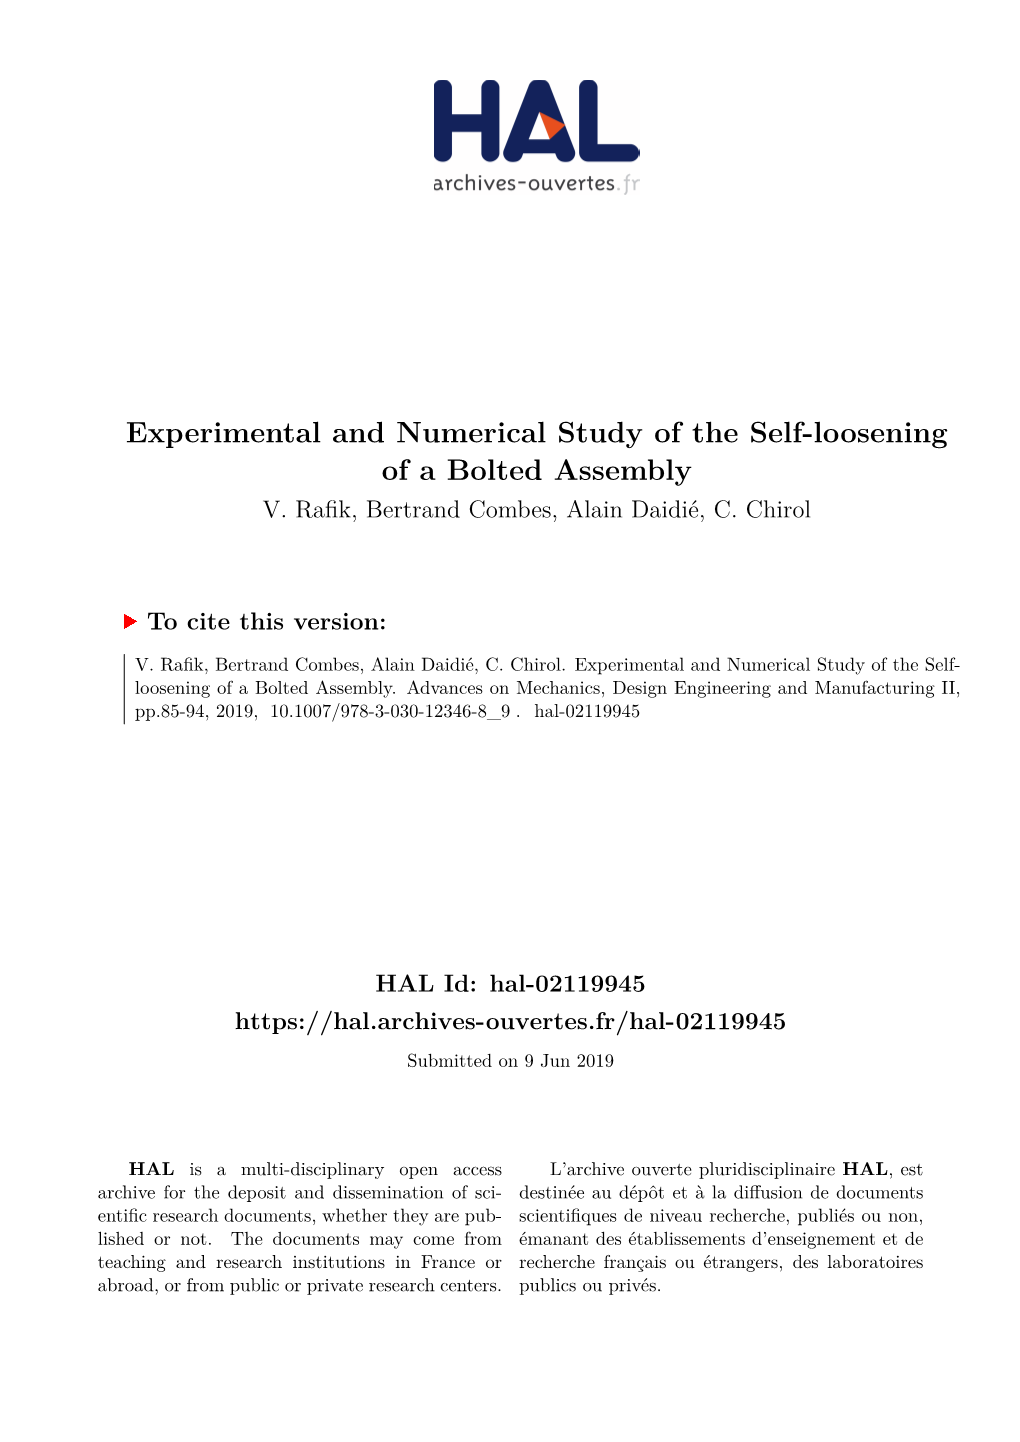 Experimental and Numerical Study of the Self-Loosening of a Bolted Assembly V